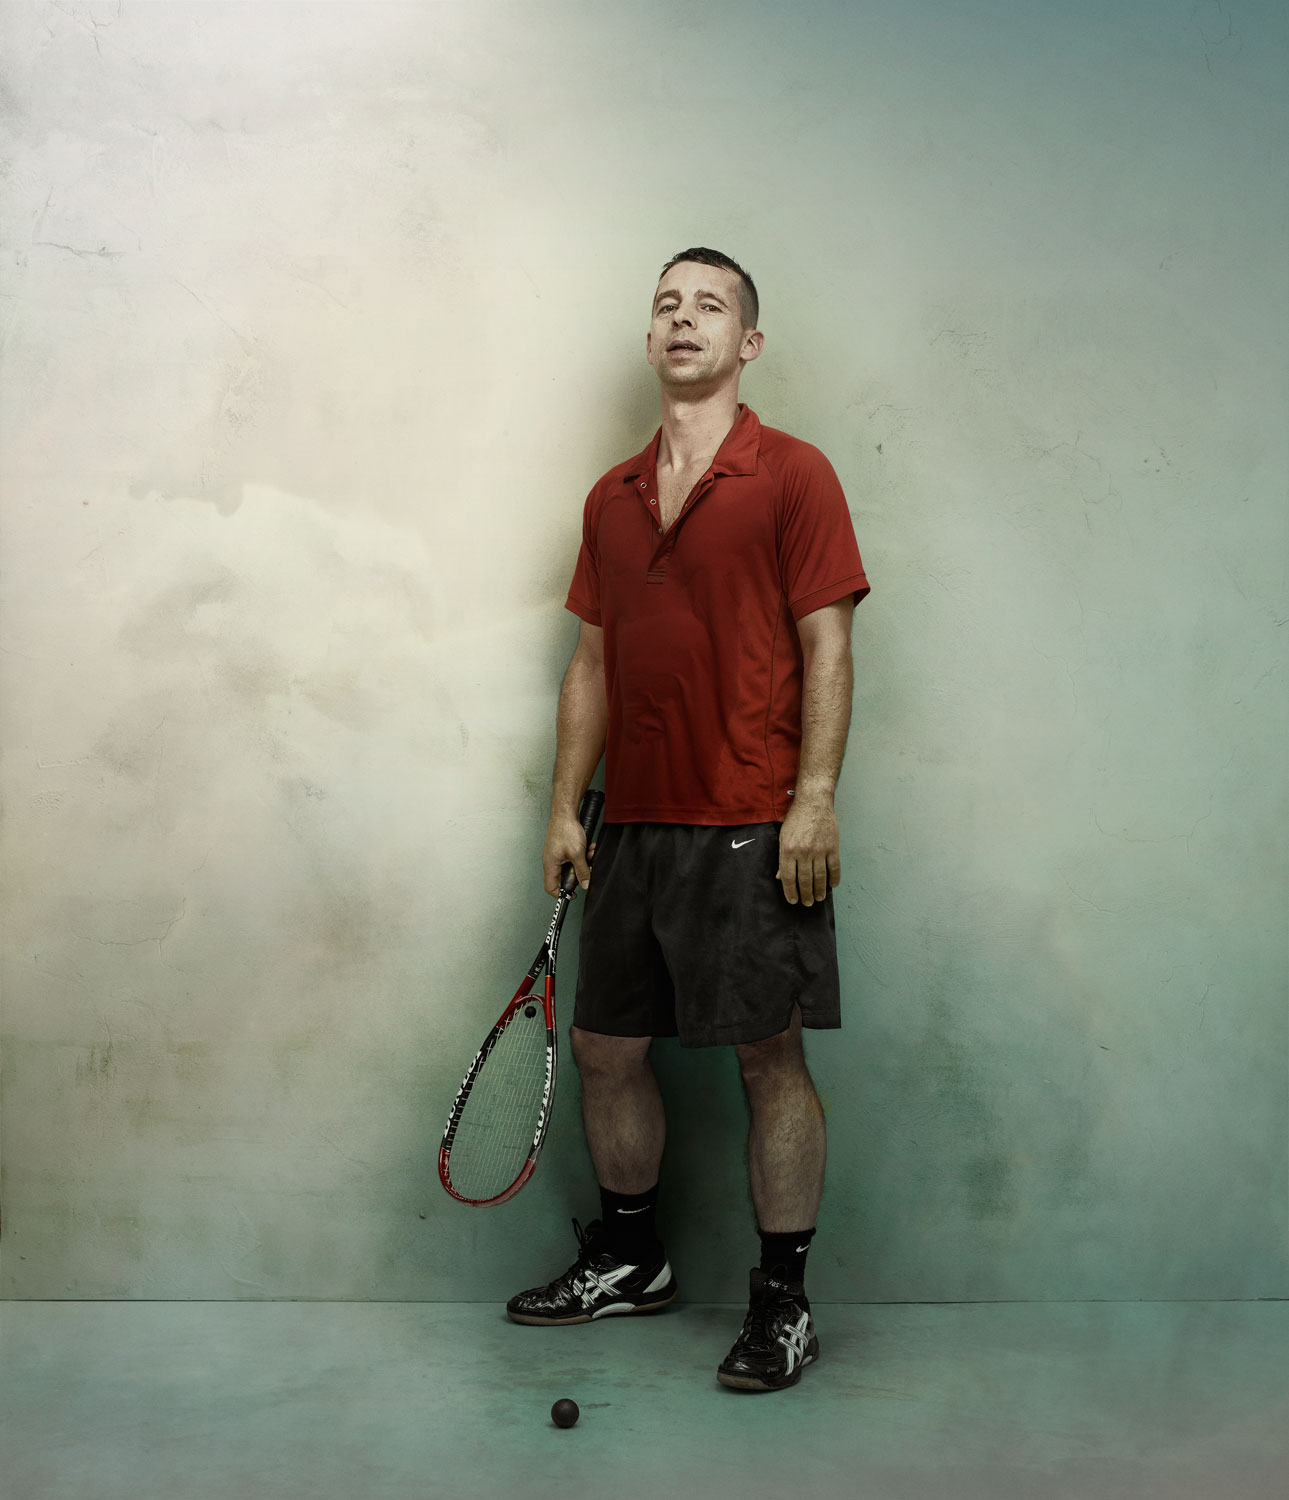 Portrait; squash; man; cancer; non hodgkin; stichting tegenkracht; sports, football, soccer, cycling, swimming, breast, stomach,